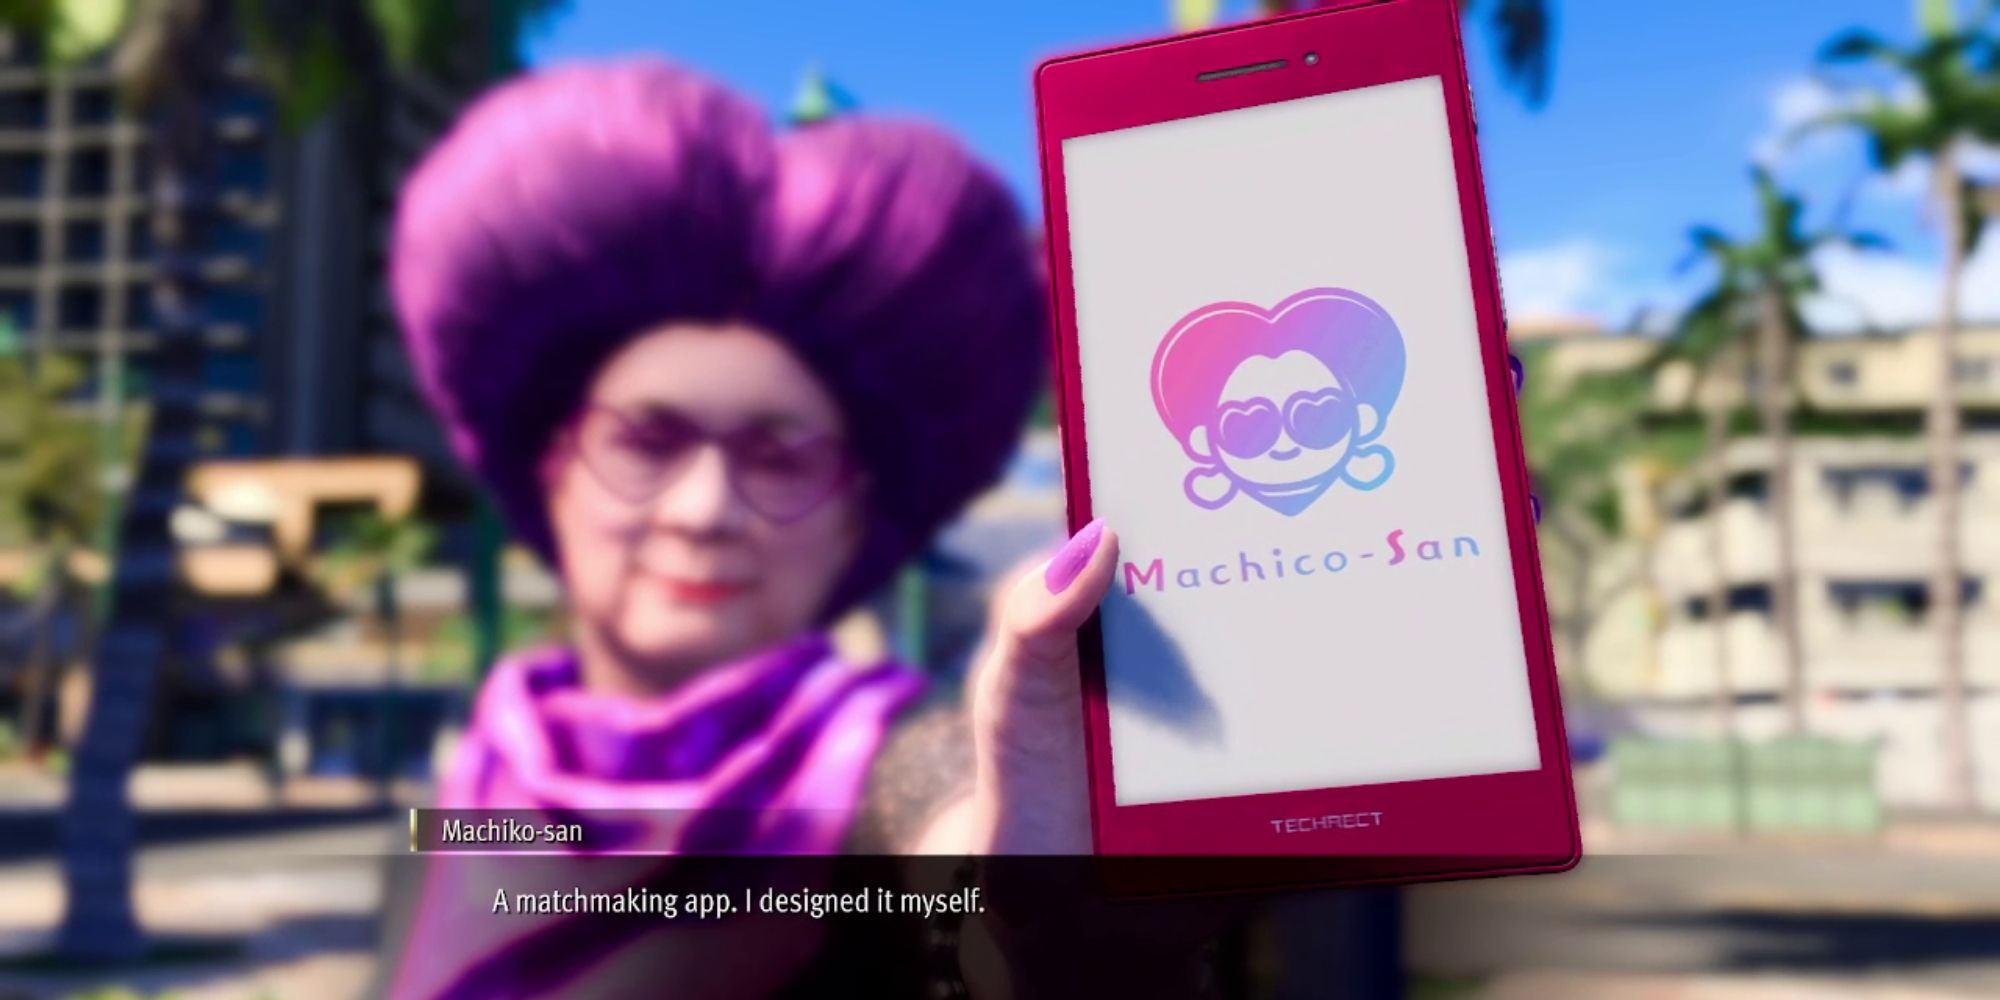 The purple-haired Machiko-san holds out a smartphone with the logo for Miss Match displayed on it in a screenshot from Like a Dragon: Infinite Wealth.